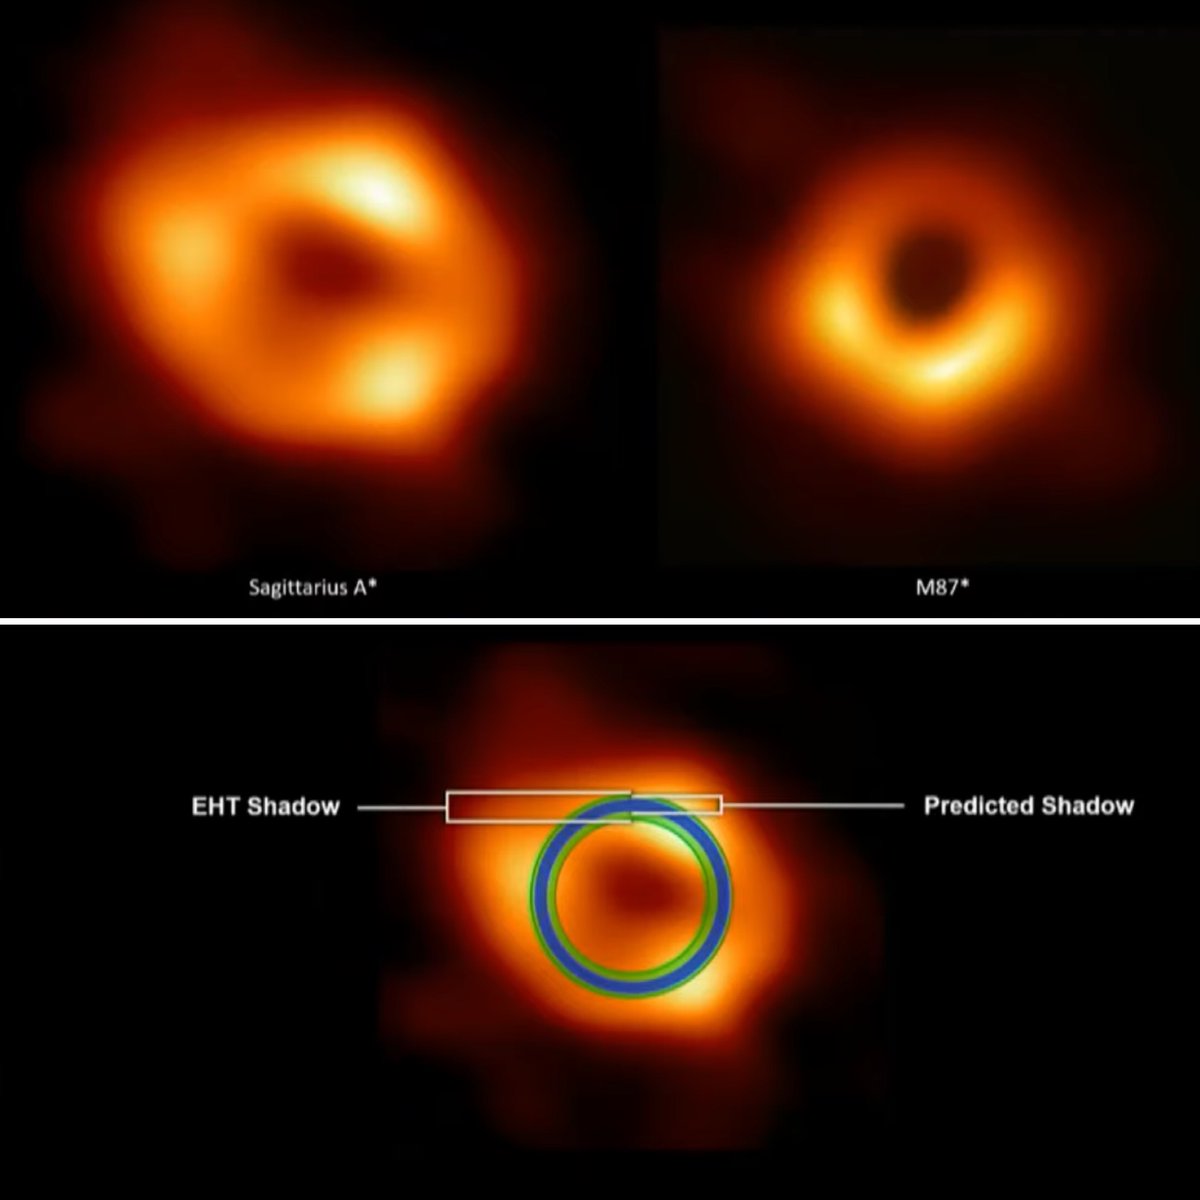 The EHT image of the black hole at the center of *our* galaxy, contrasted with the M87 one from a few years back. Stunning! The comparison to GR predictions at the bottom is truly remarkable! #eventhorizontelescope